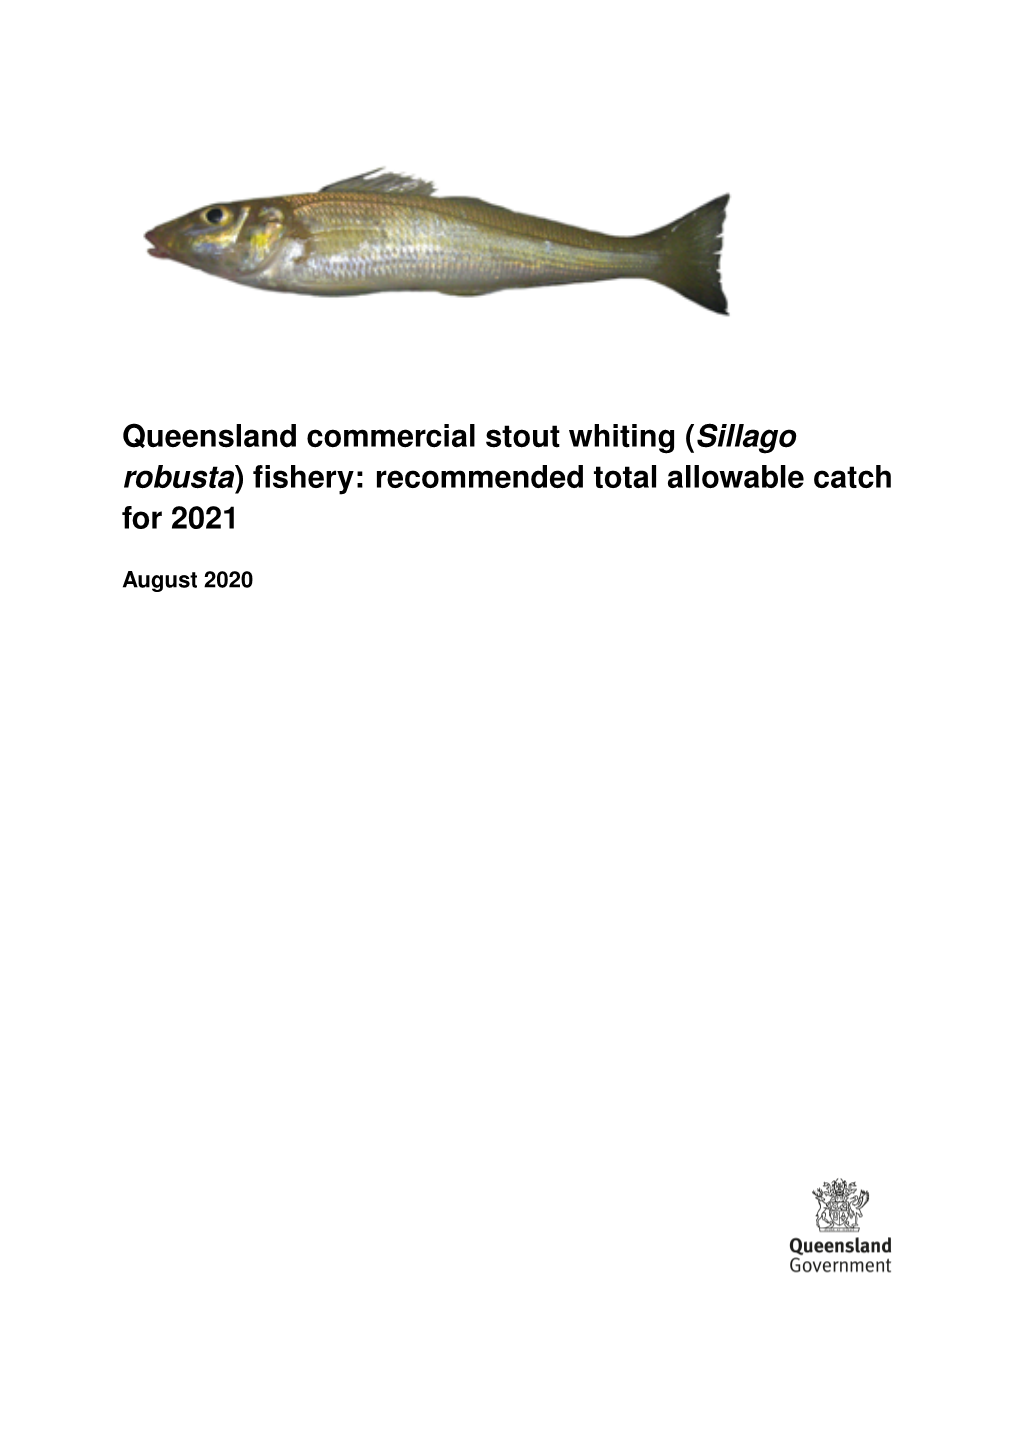 Queensland Commercial Stout Whiting (Sillago Robusta) Fishery